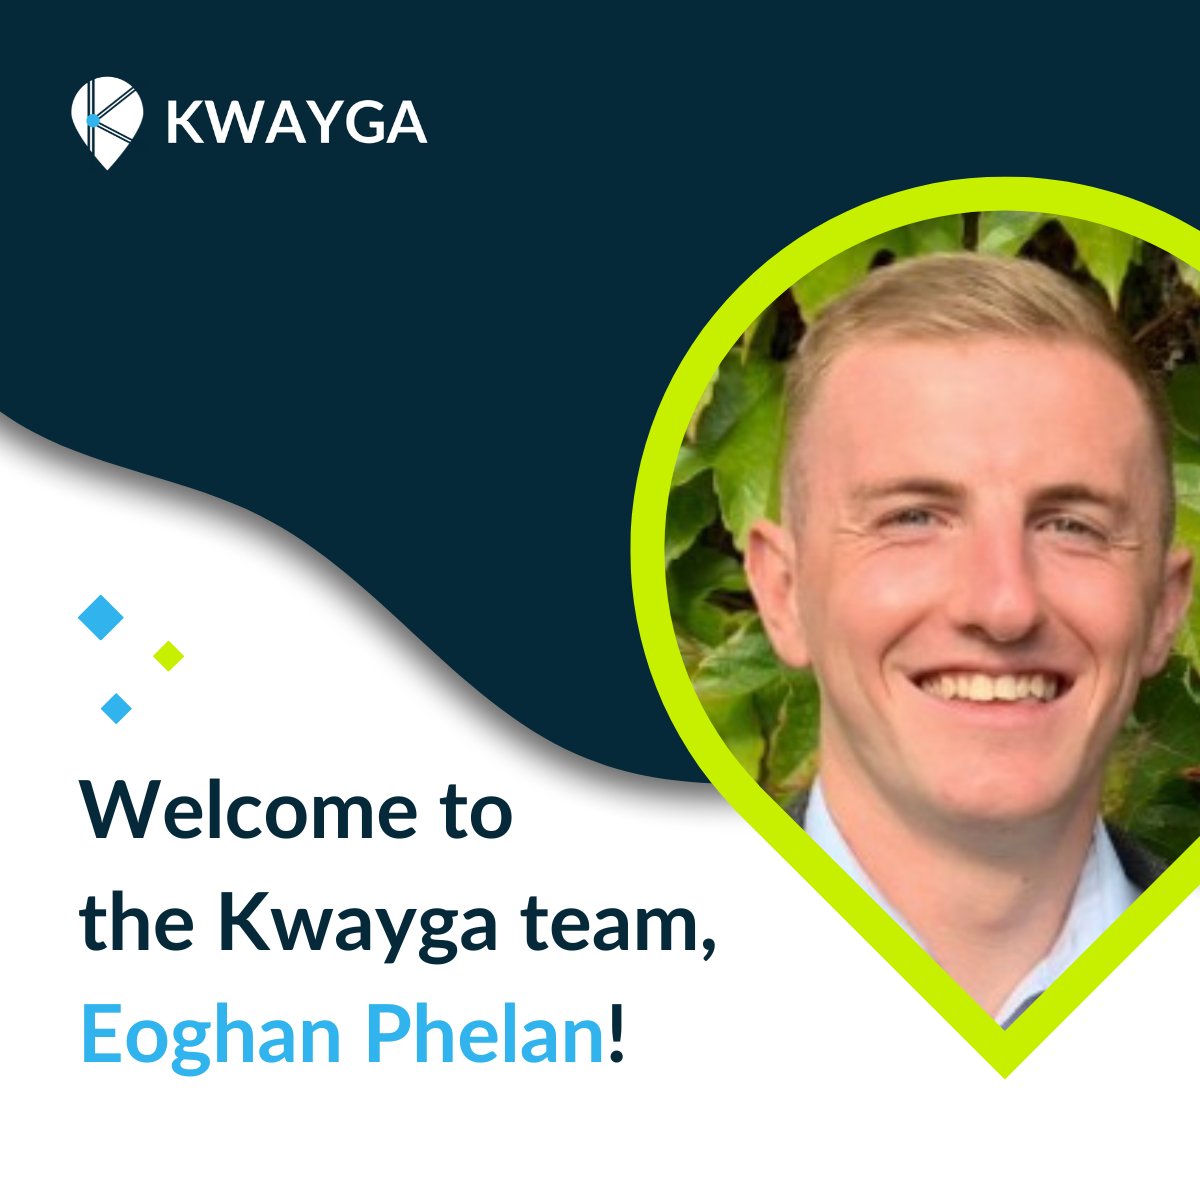 We're thrilled to welcome Eoghan Phelan to the #KwaygaTeam as our new QA Manager! Eoghan brings a wealth of expertise and enthusiasm to ensure our solutions meet the highest standards. Excited for the innovation and excellence he'll bring to our team! #Tech #QAManager